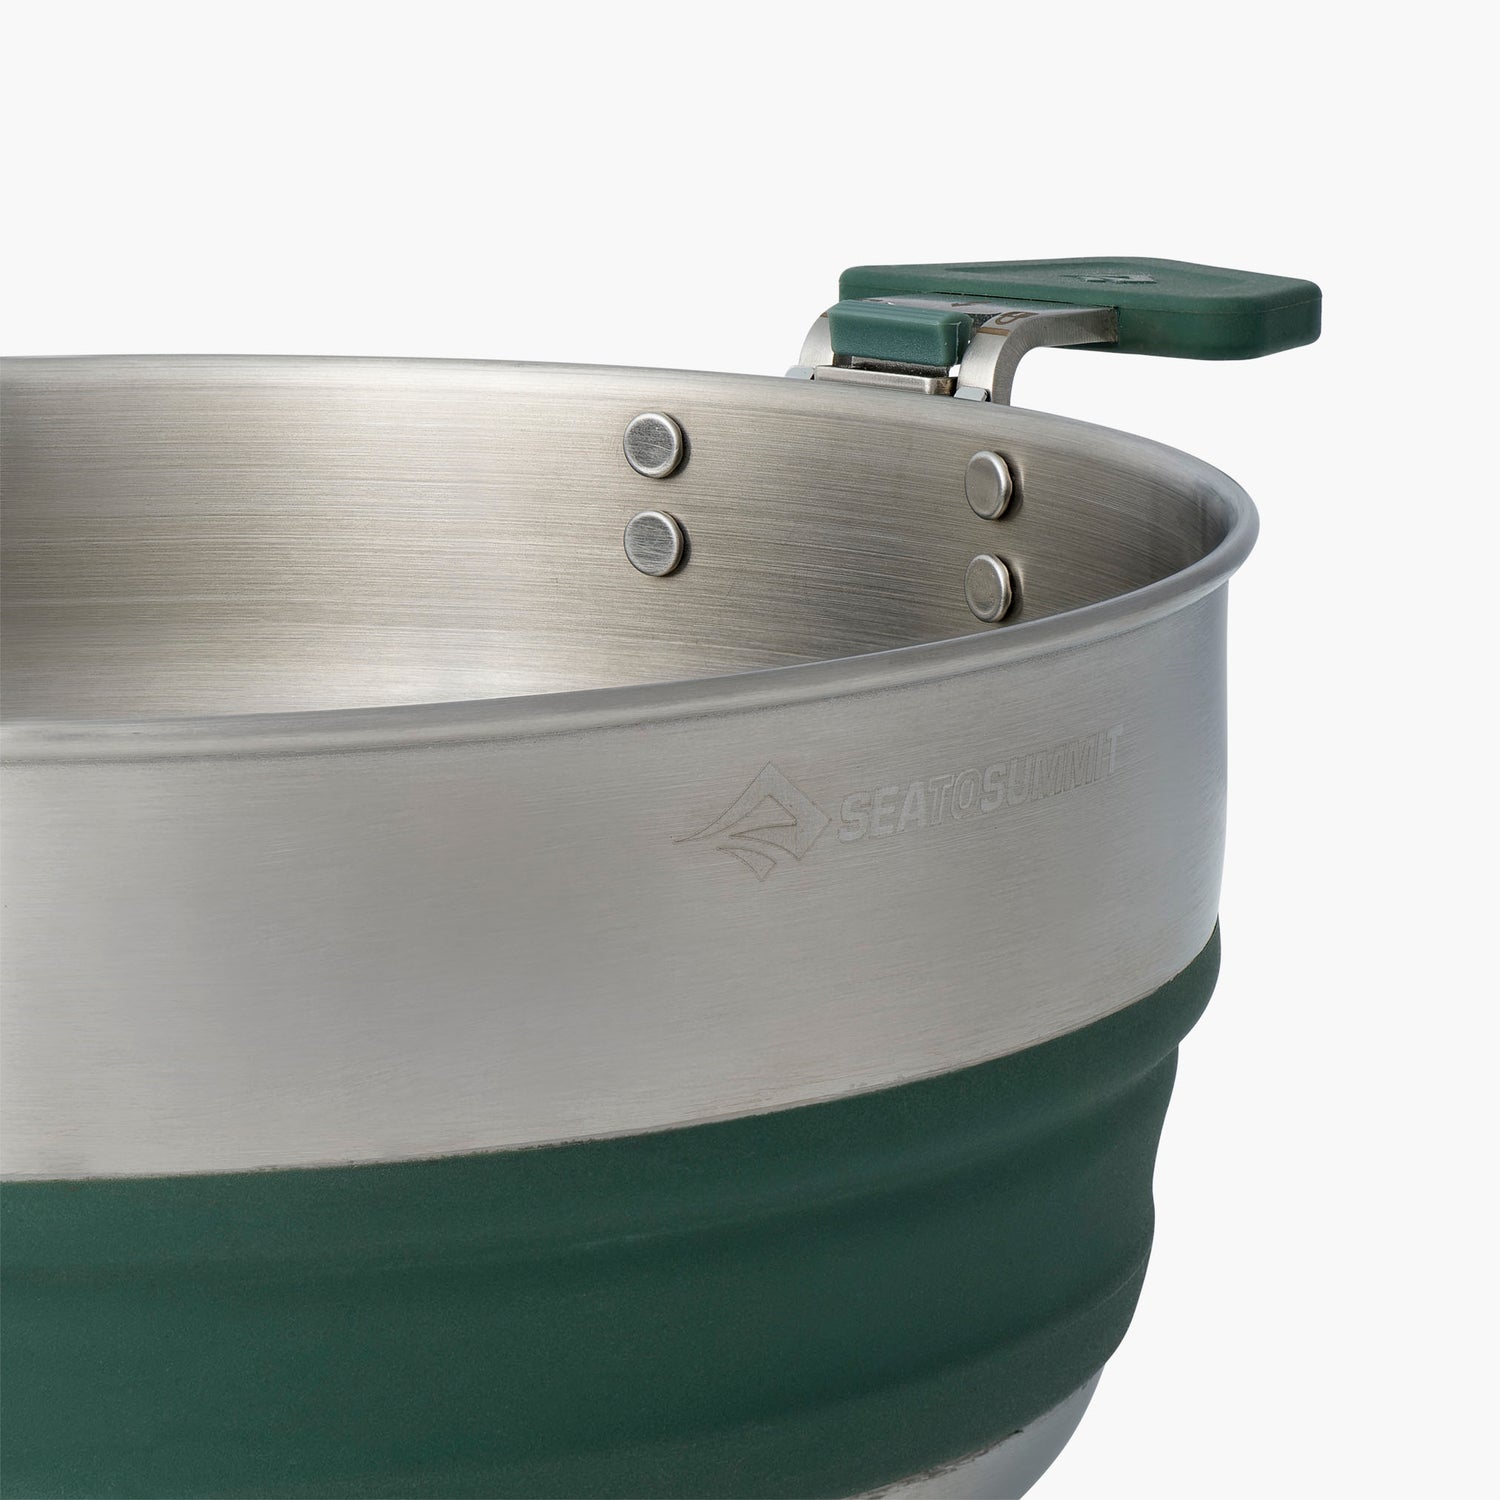 Detour Stainless Steel Collapsible 3L Pot